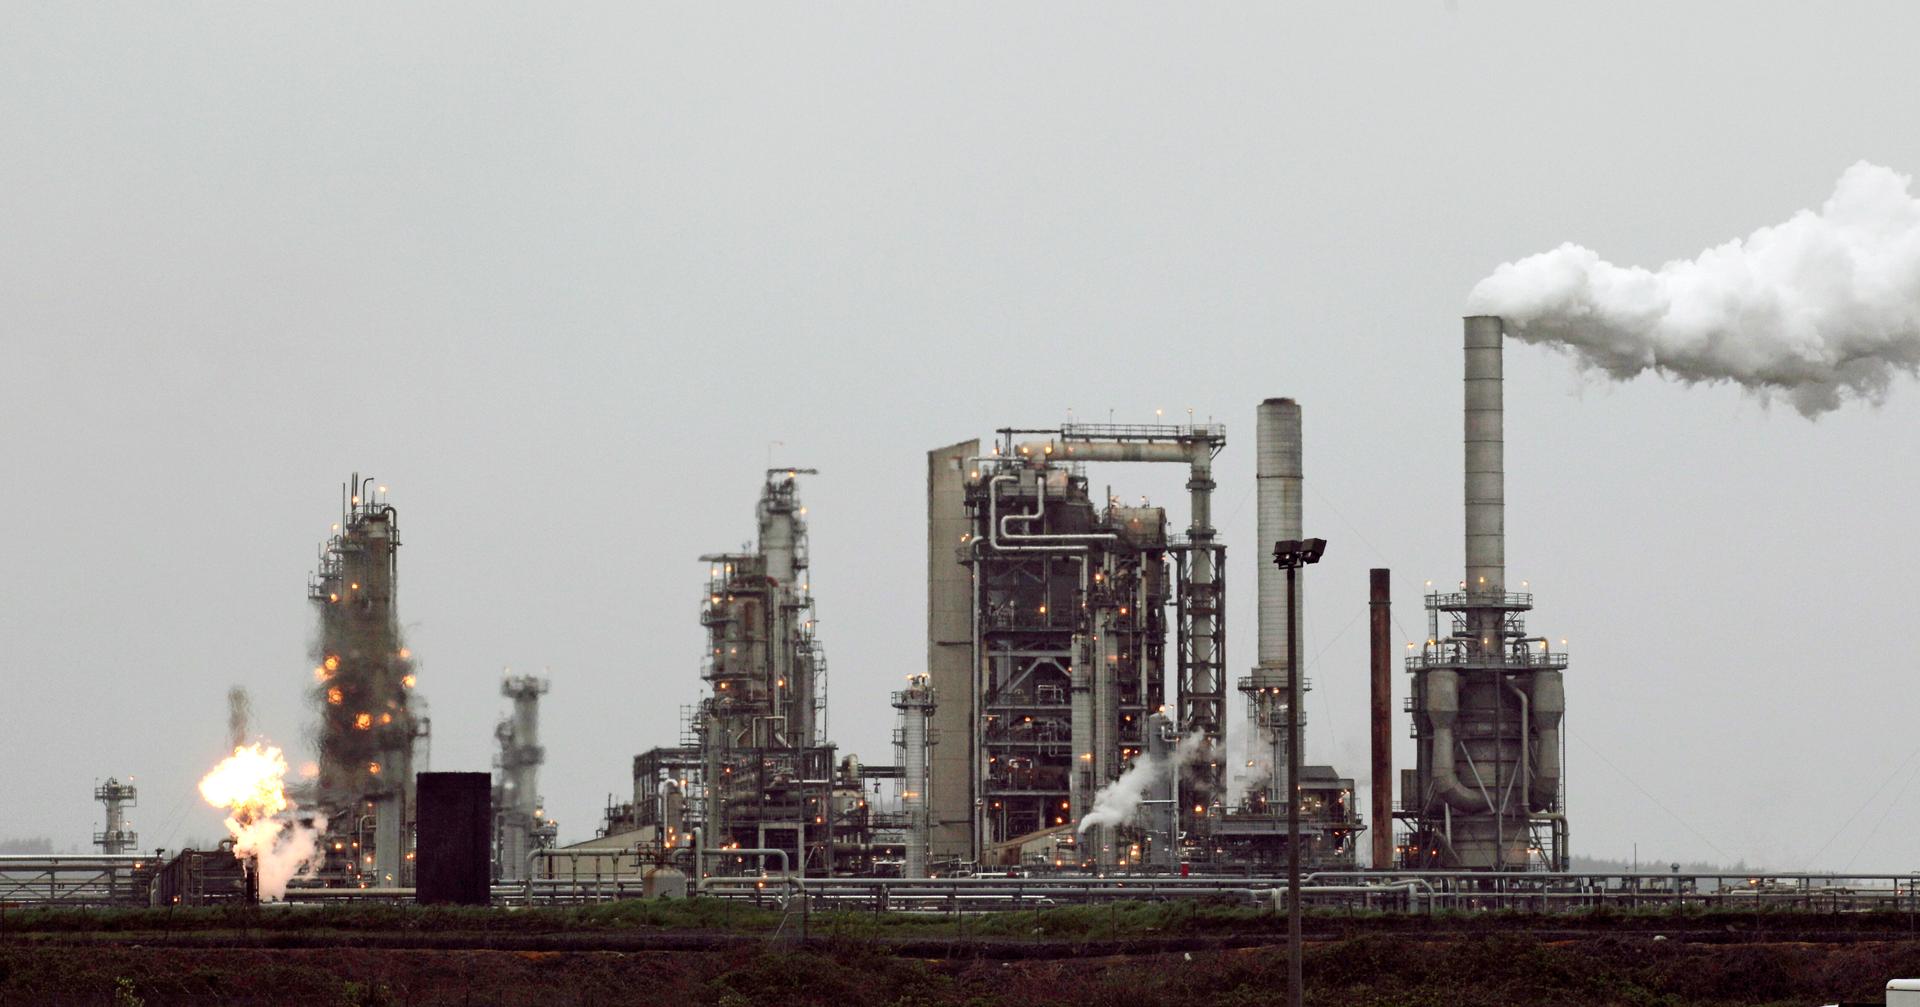 A Tesoro Corp. refinery, including a gas flare flame that is part of normal plant operations, in Anacortes, Washington.